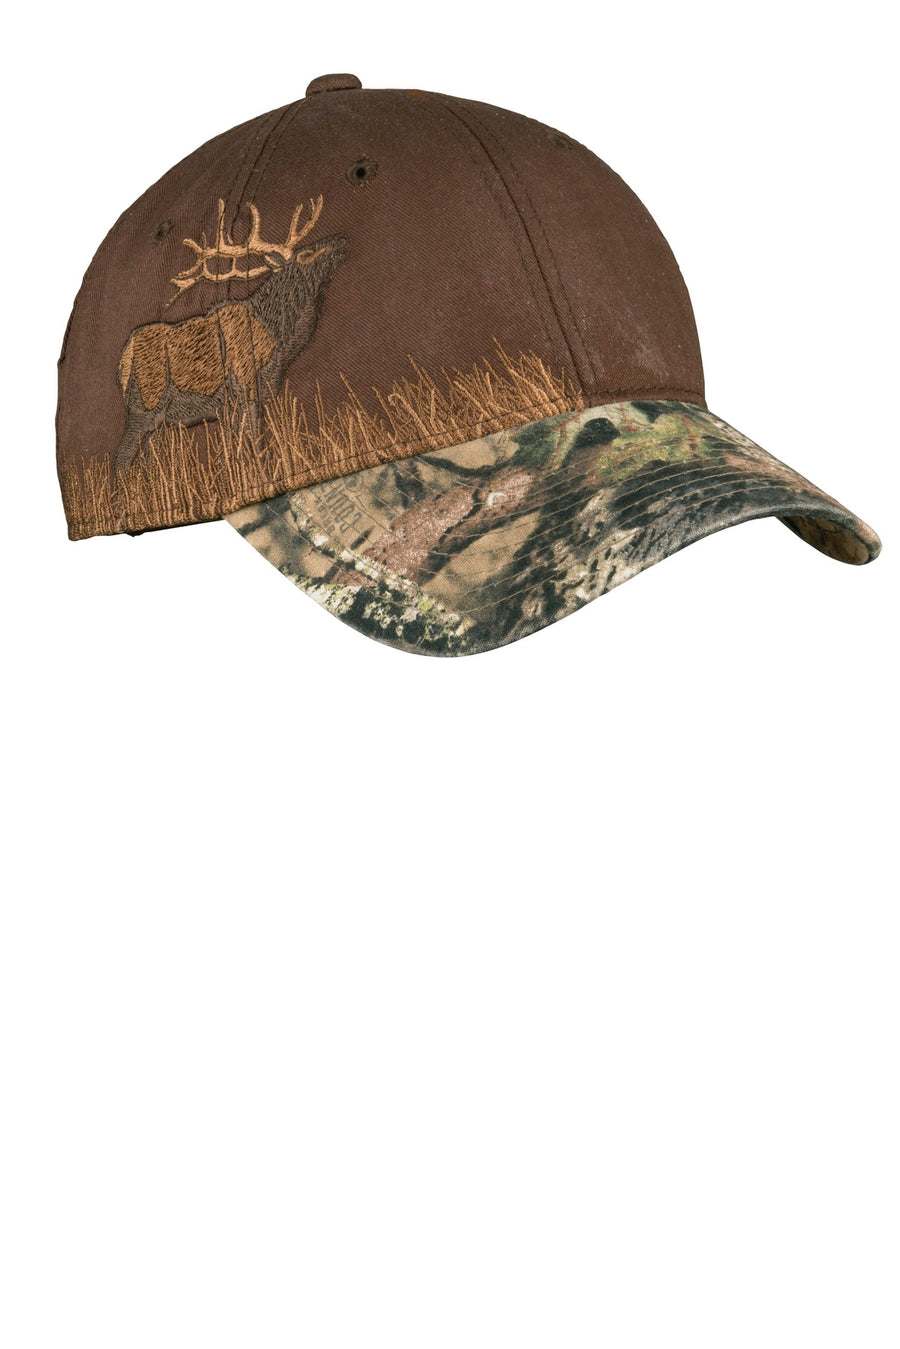 Port Authority Embroidered Camouflage Cap.